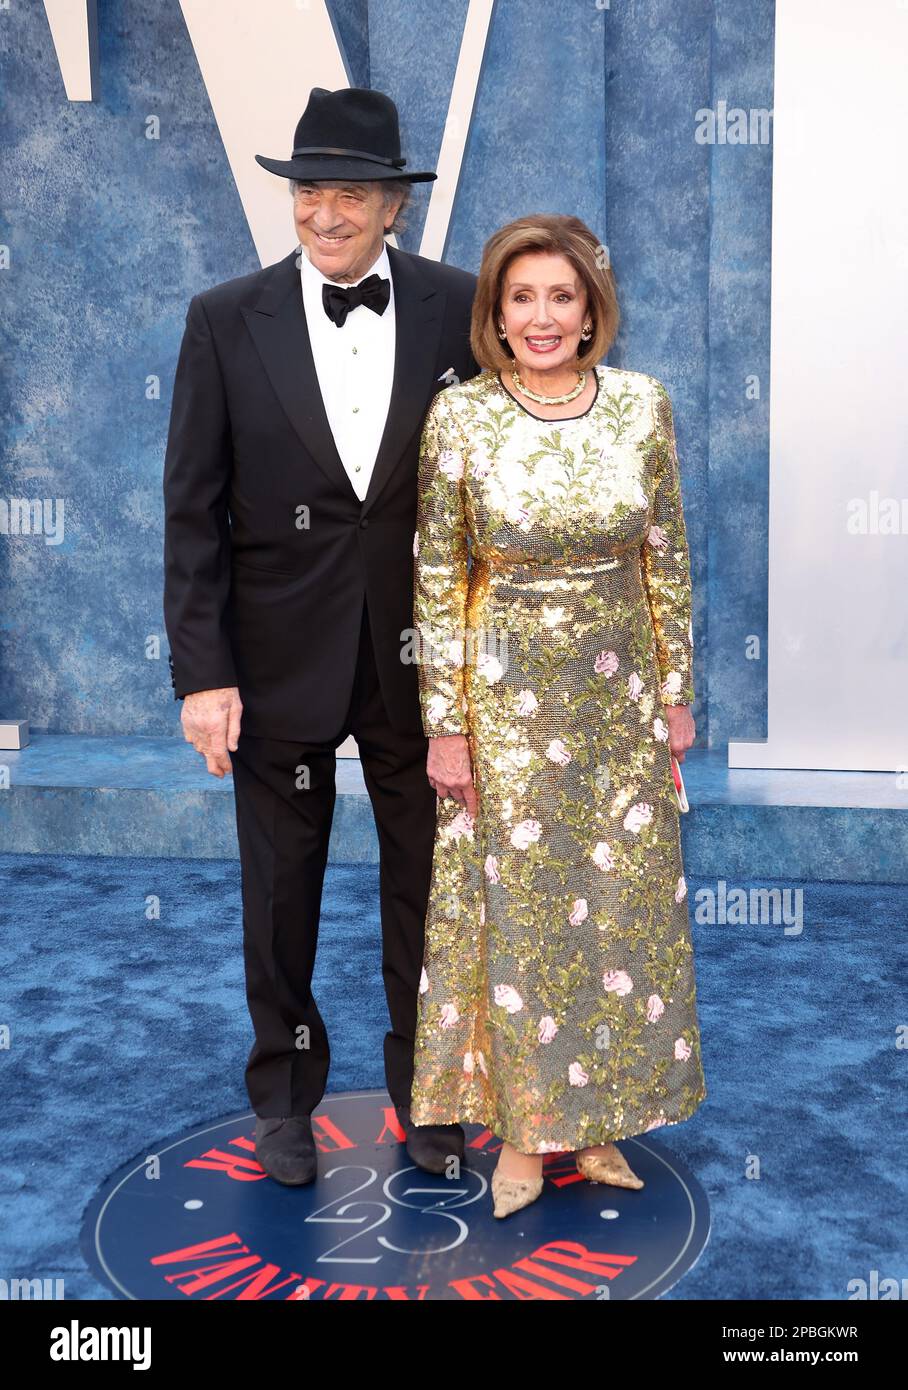 Beverly Hills, USA. 12th Mar, 2023. Paul Pelosi, Nancy Pelosi attend the 2023 Vanity Fair Oscar Party at Wallis Annenberg Center for the Performing Arts on March 12, 2023 in Beverly Hills, California. Photo: CraSH/imageSPACE Credit: Imagespace/Alamy Live News Stock Photo